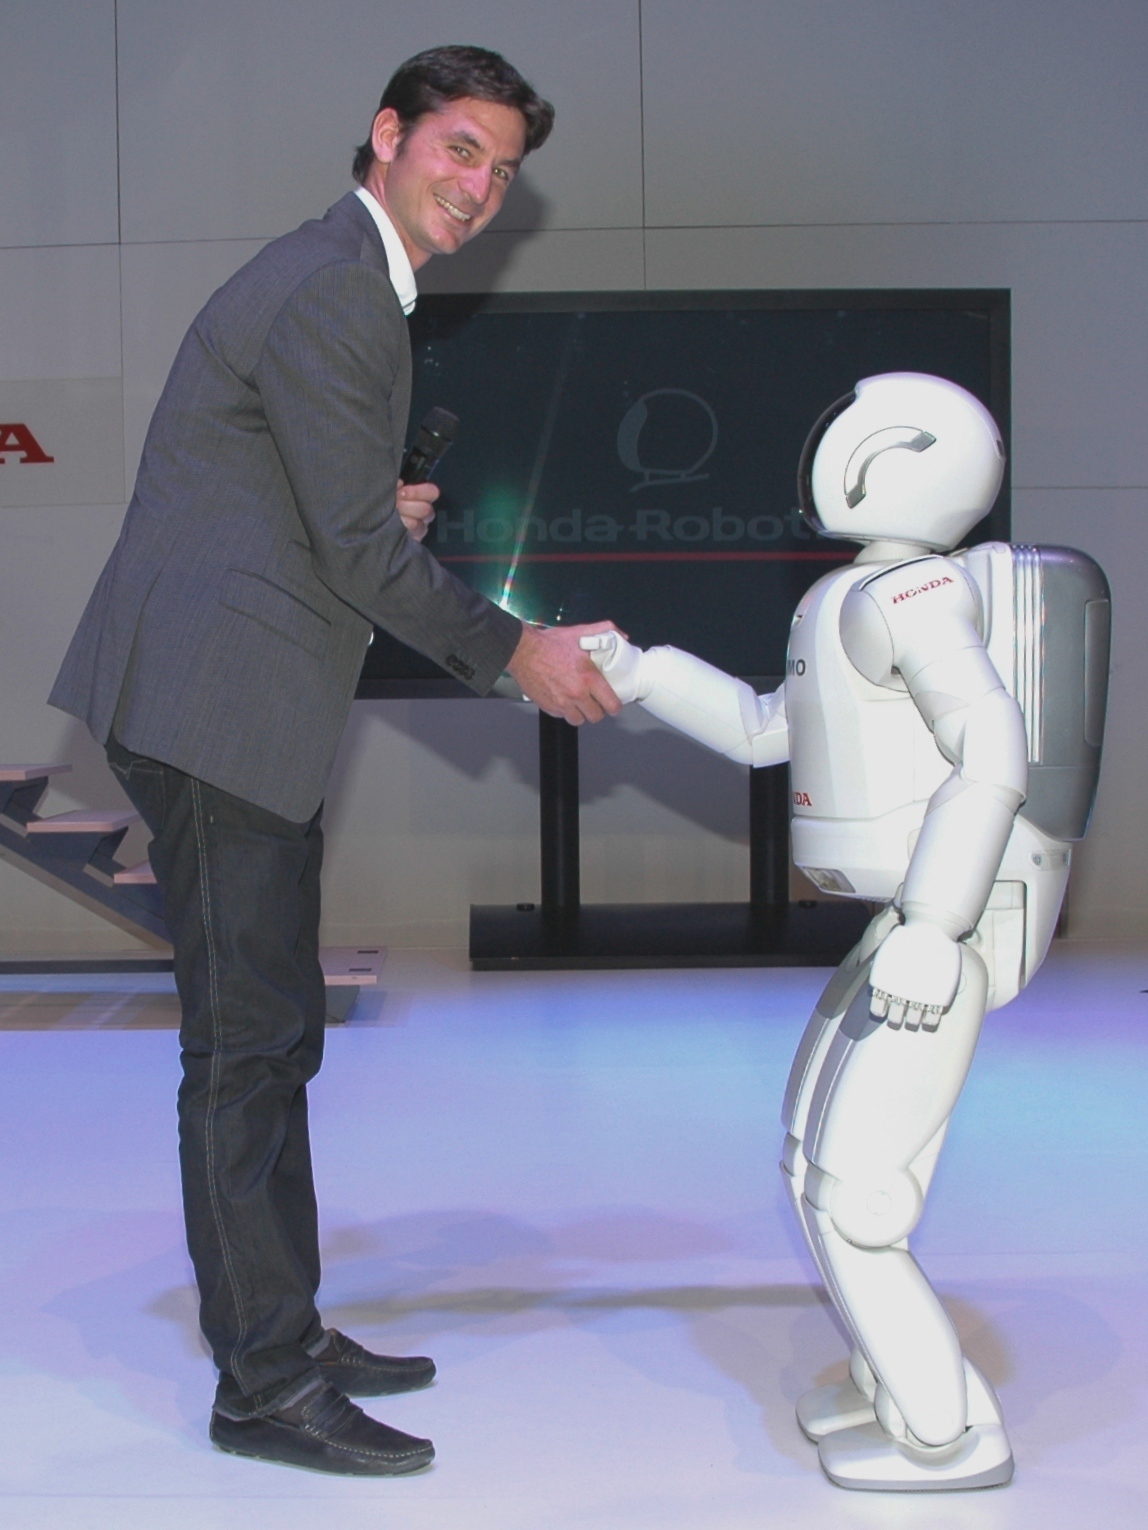 Asimo Is An Acronym For Advanced Step In Innovative Mobility